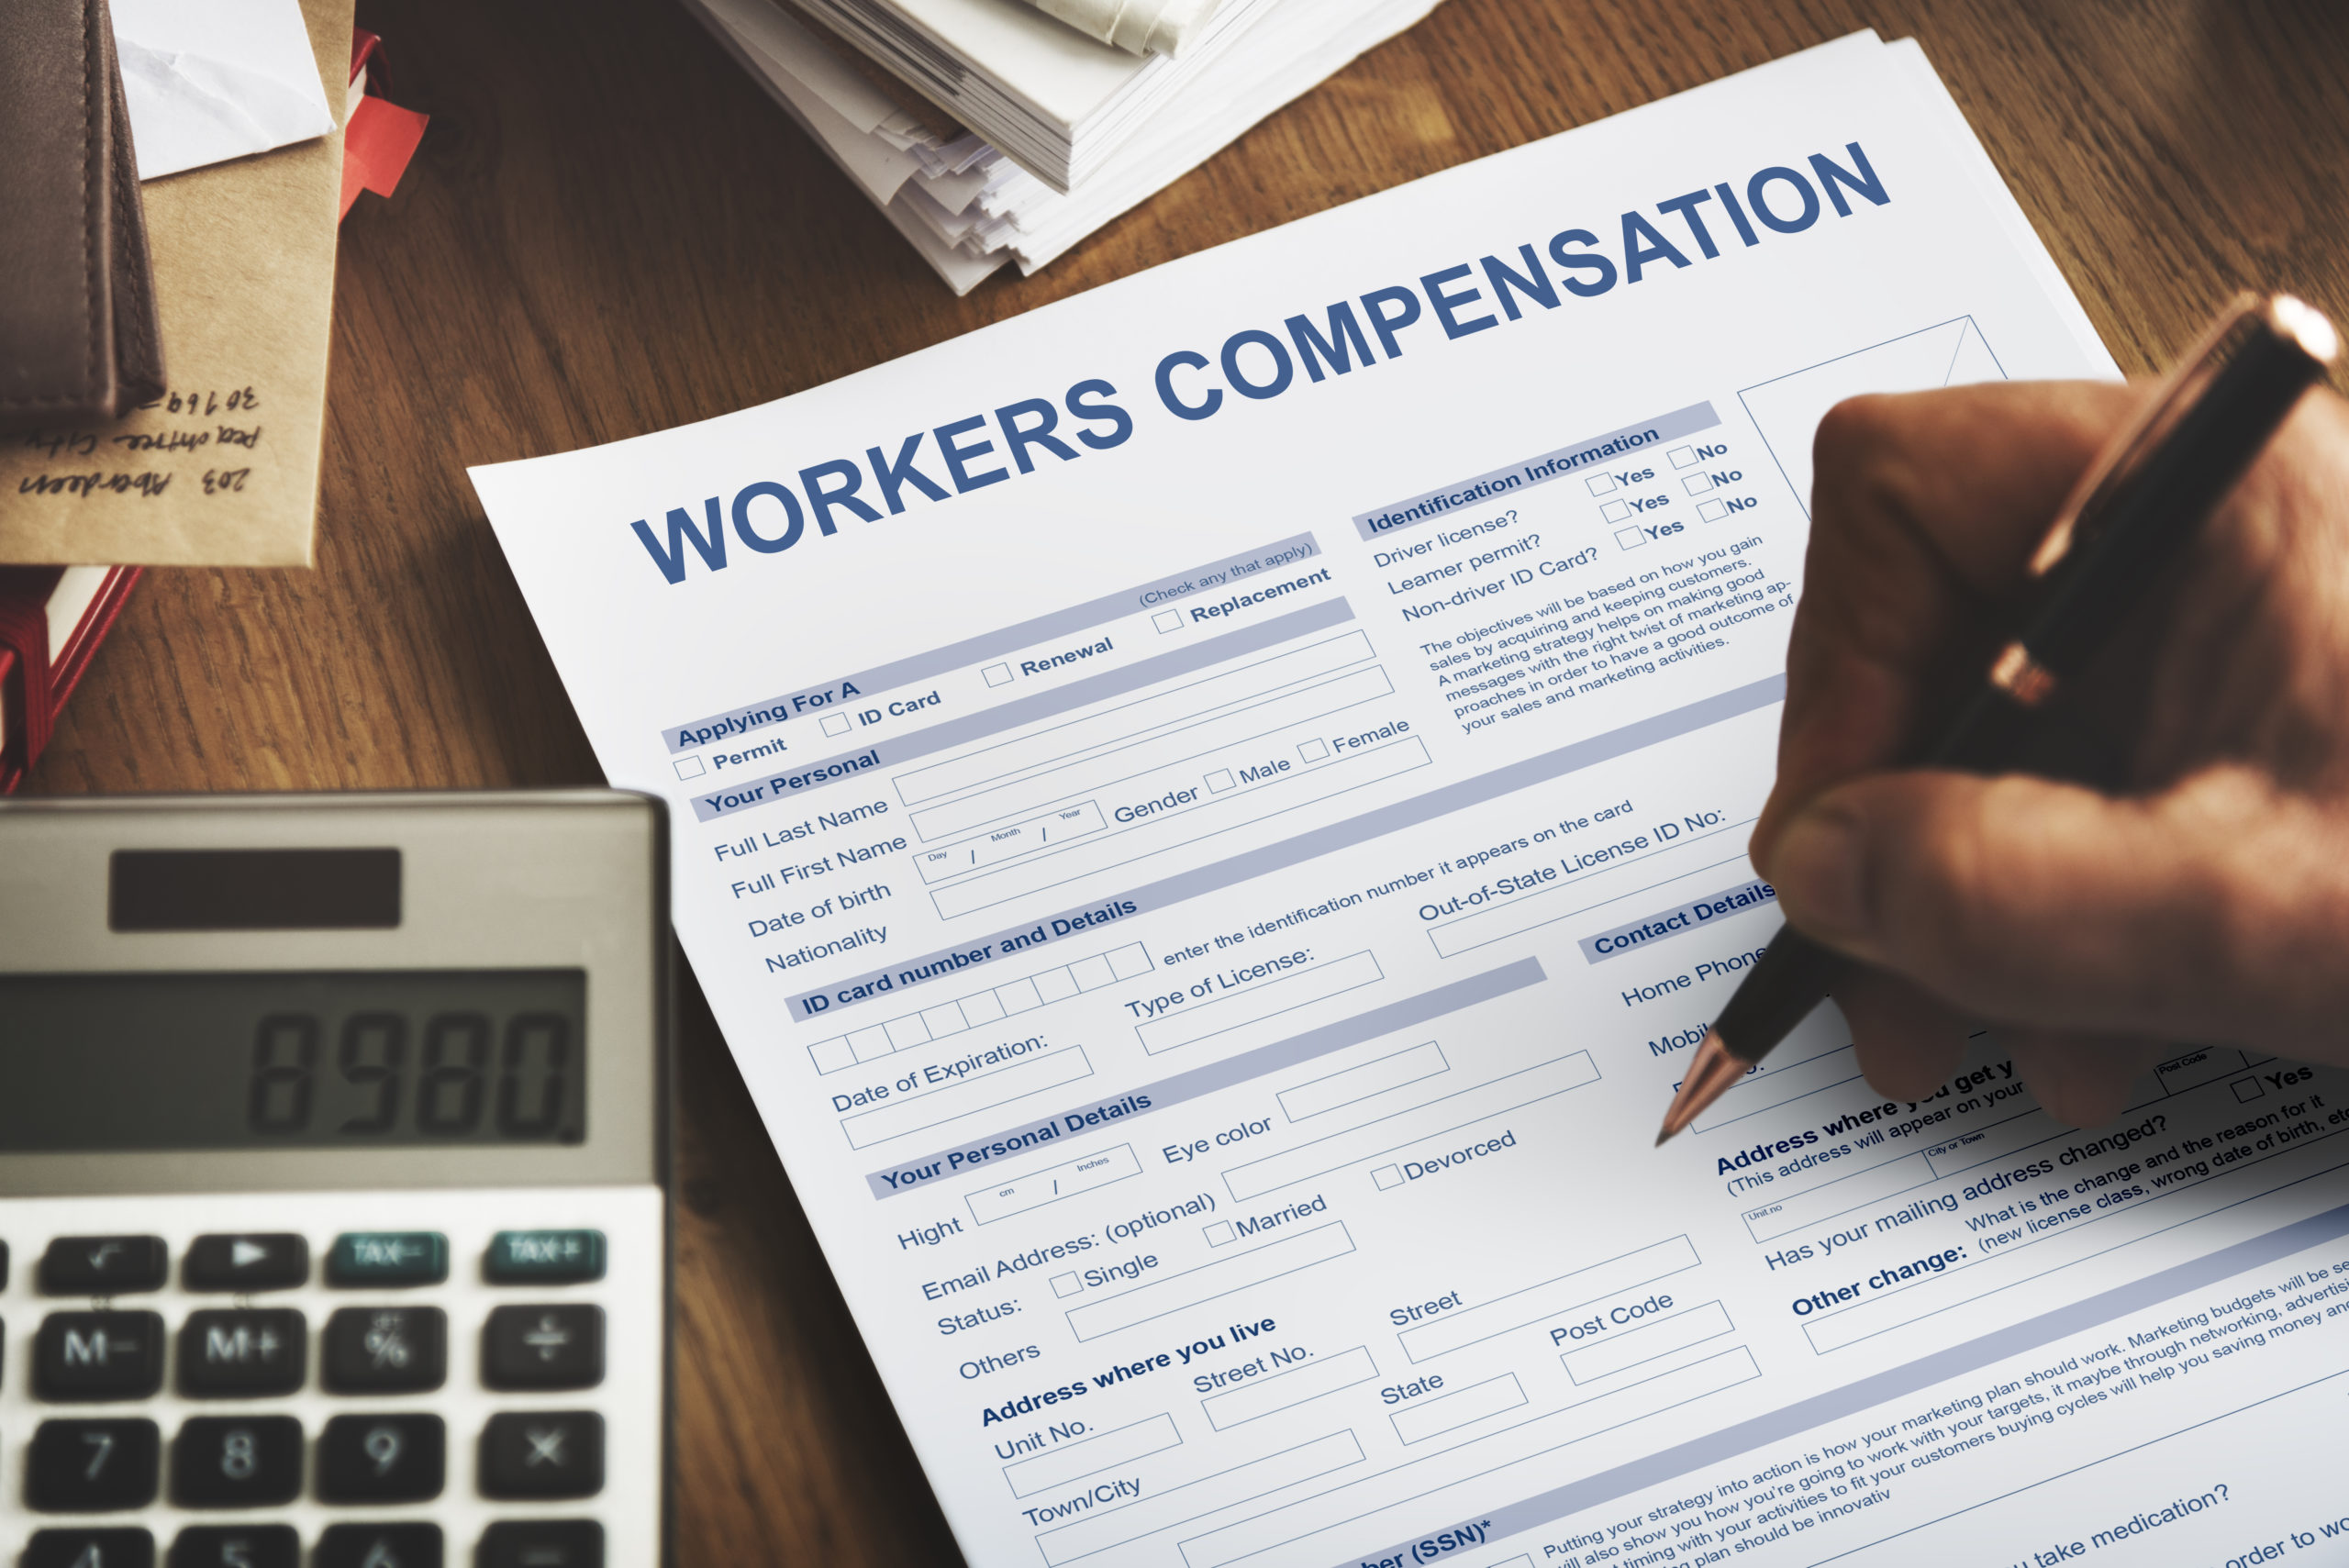 employers cannot discriminate against or fire an employee for workers’ compensation claims